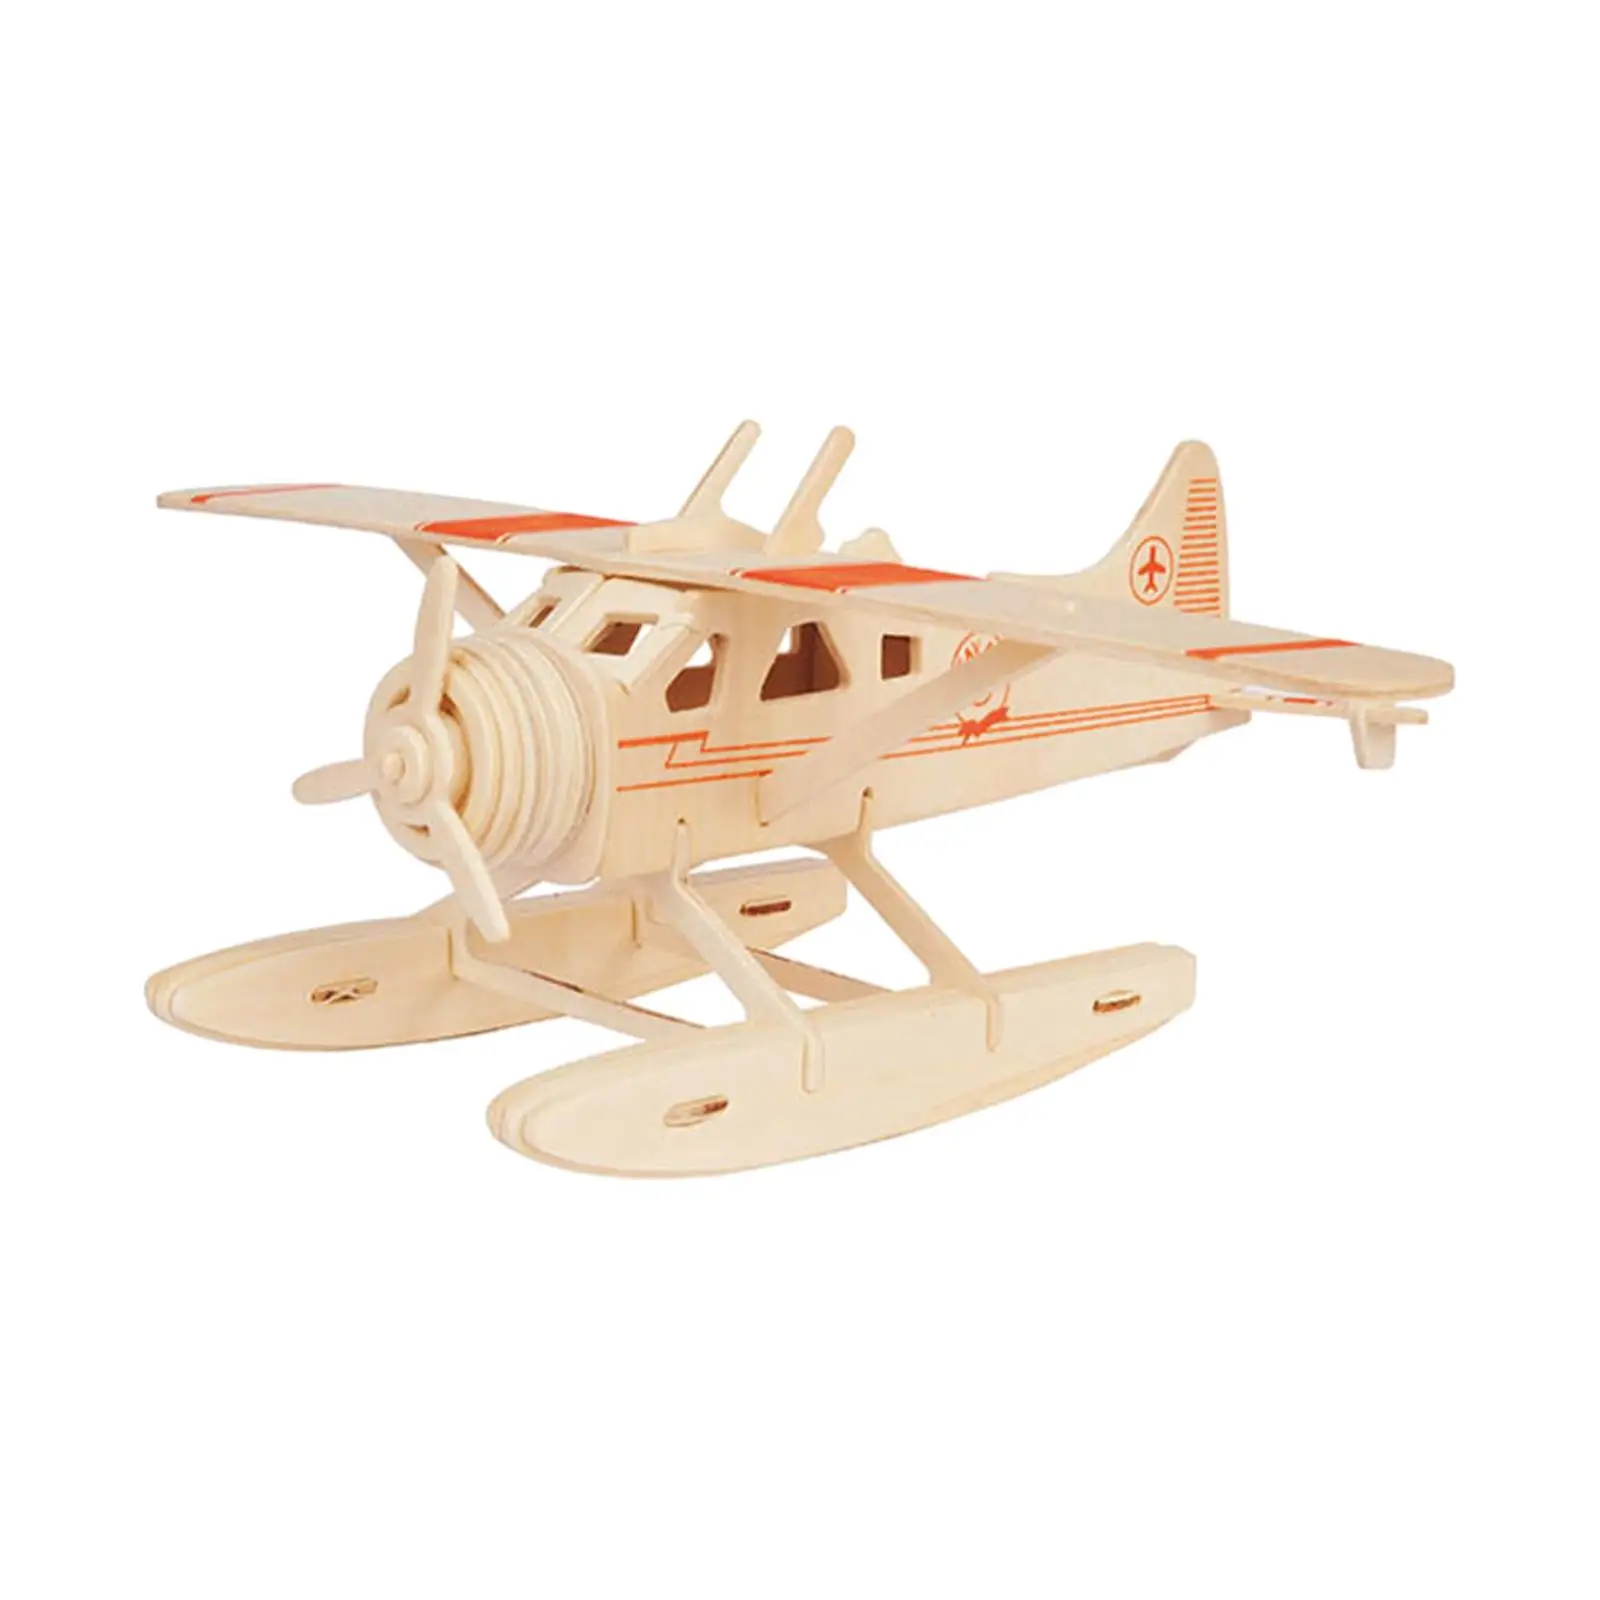 

DIY Assemble Wooden Puzzles Aircraft Collectibles Wood Plane Craft Construction Model Kits for Ages 7 8 9 10 Years Old Friends